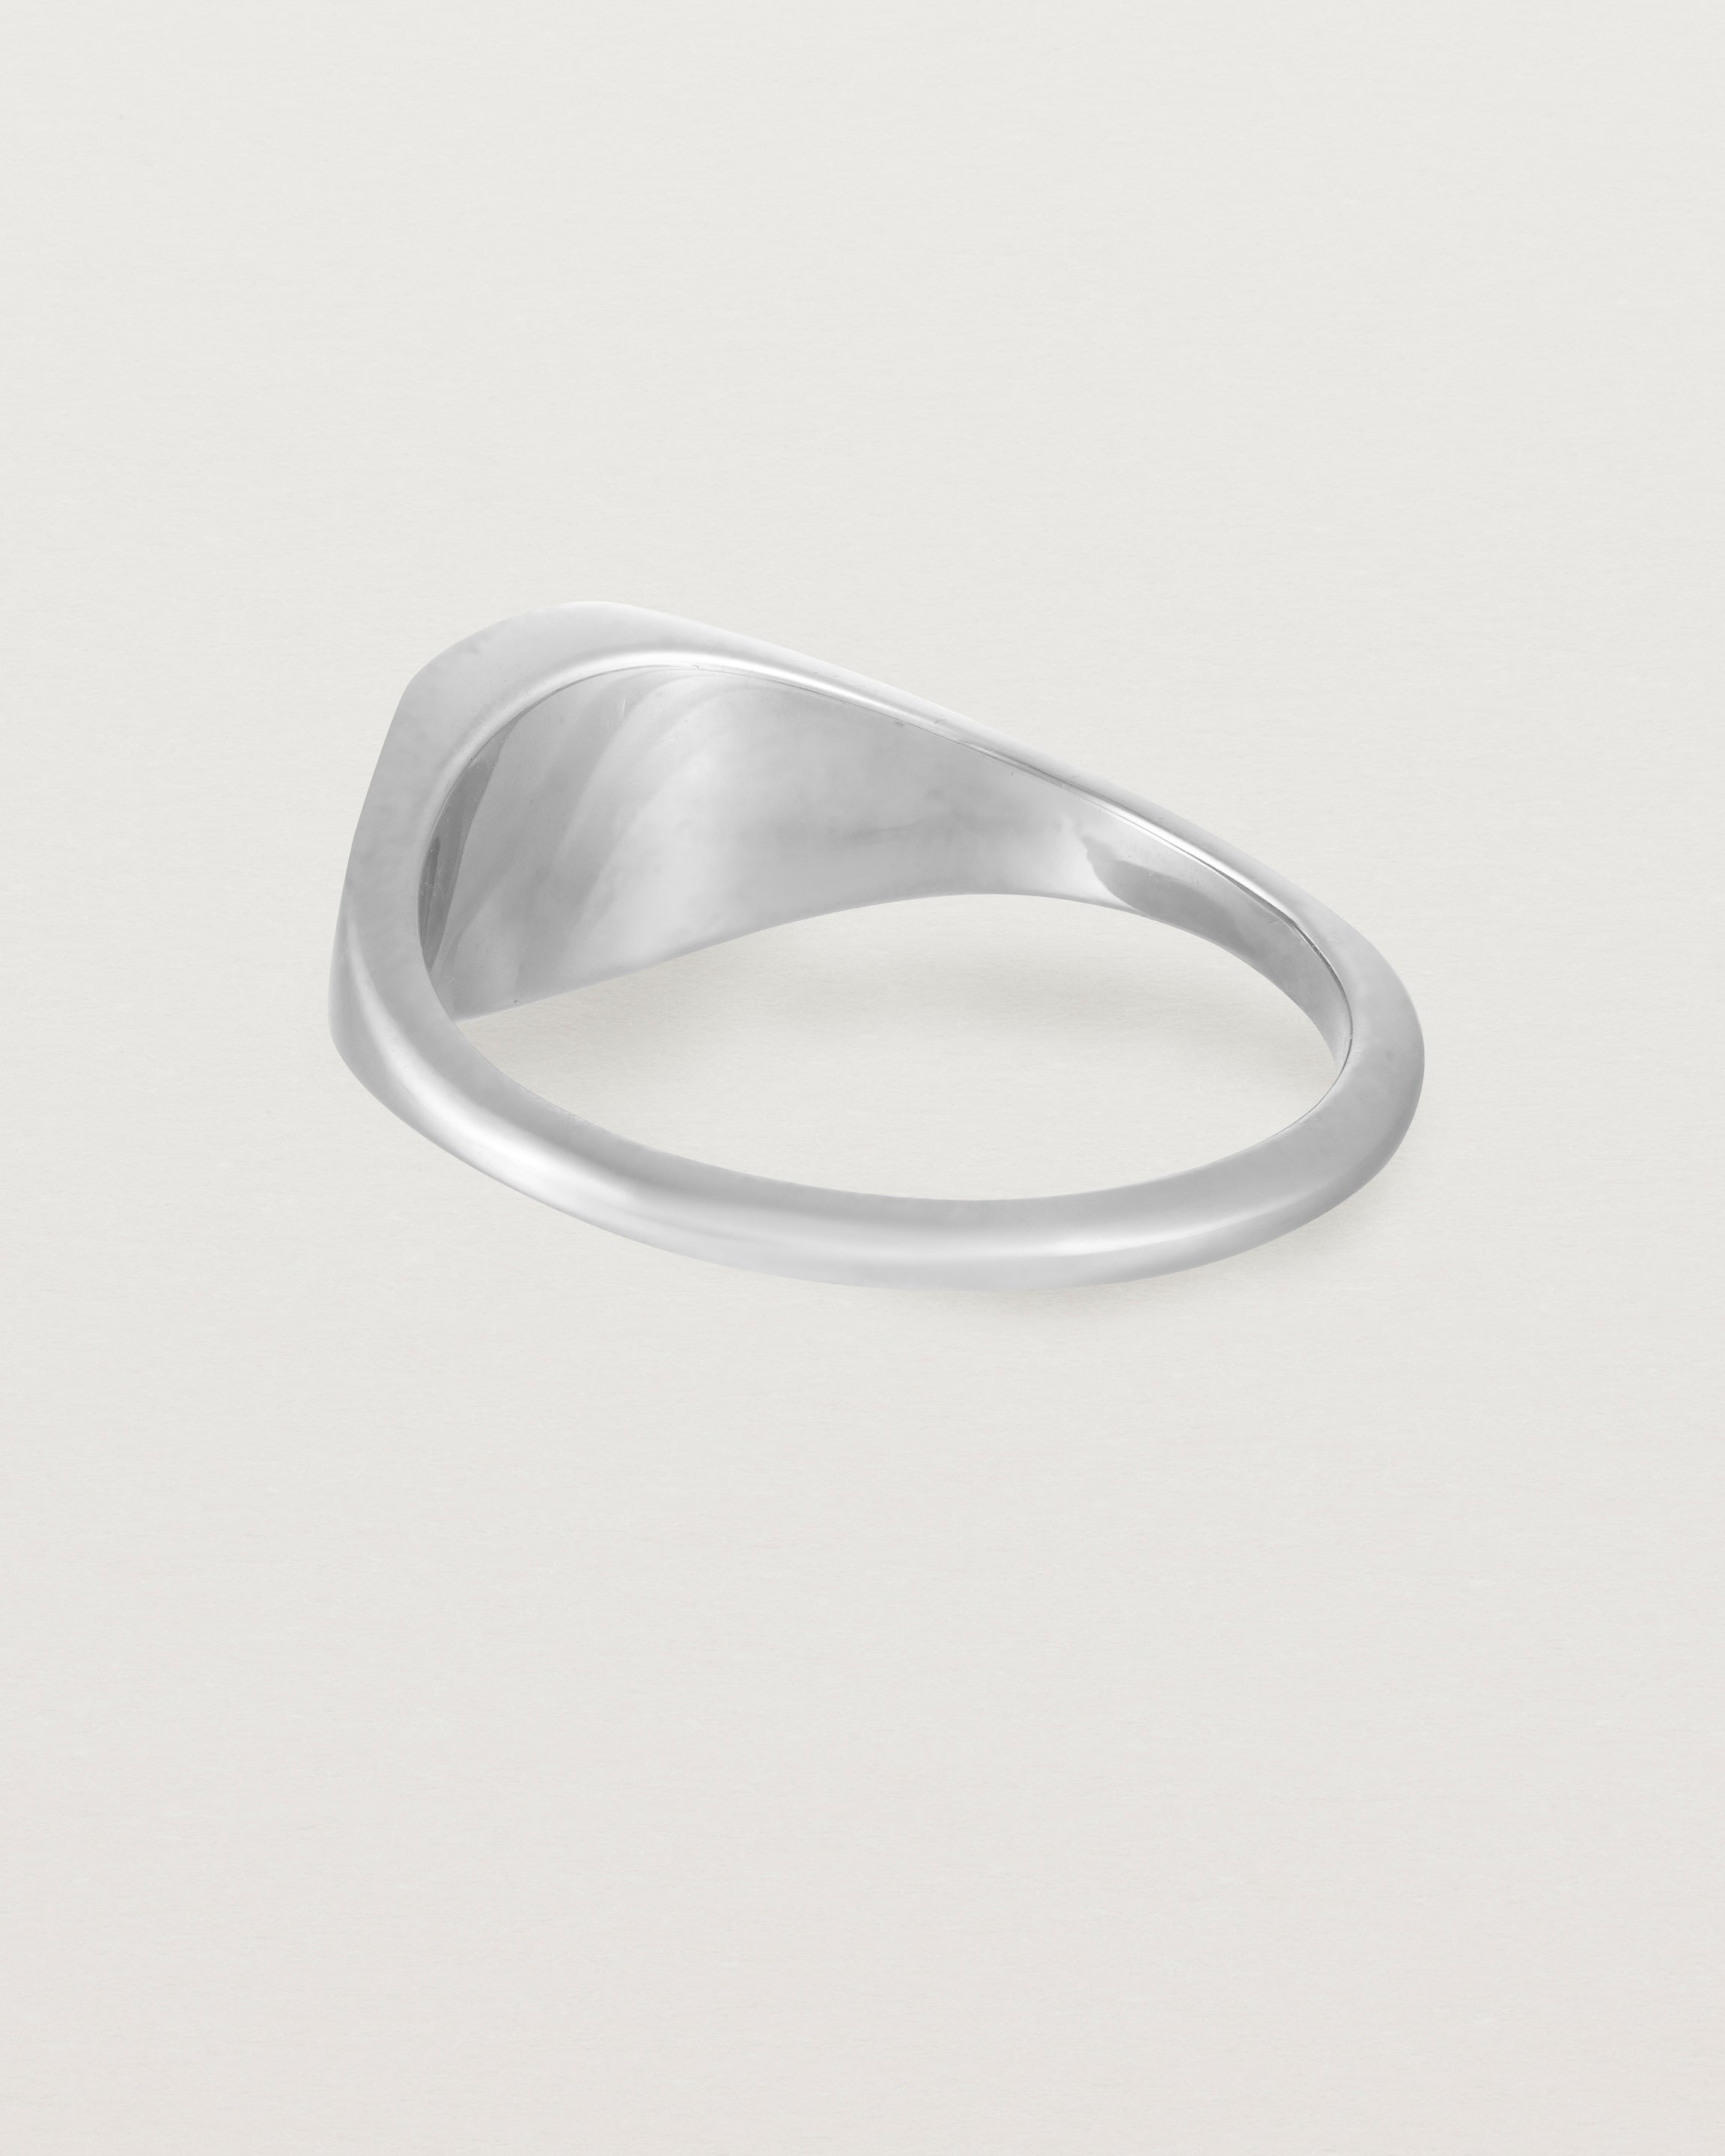 Back view of a simple signet with an elongated rectangular face in sterling silver.